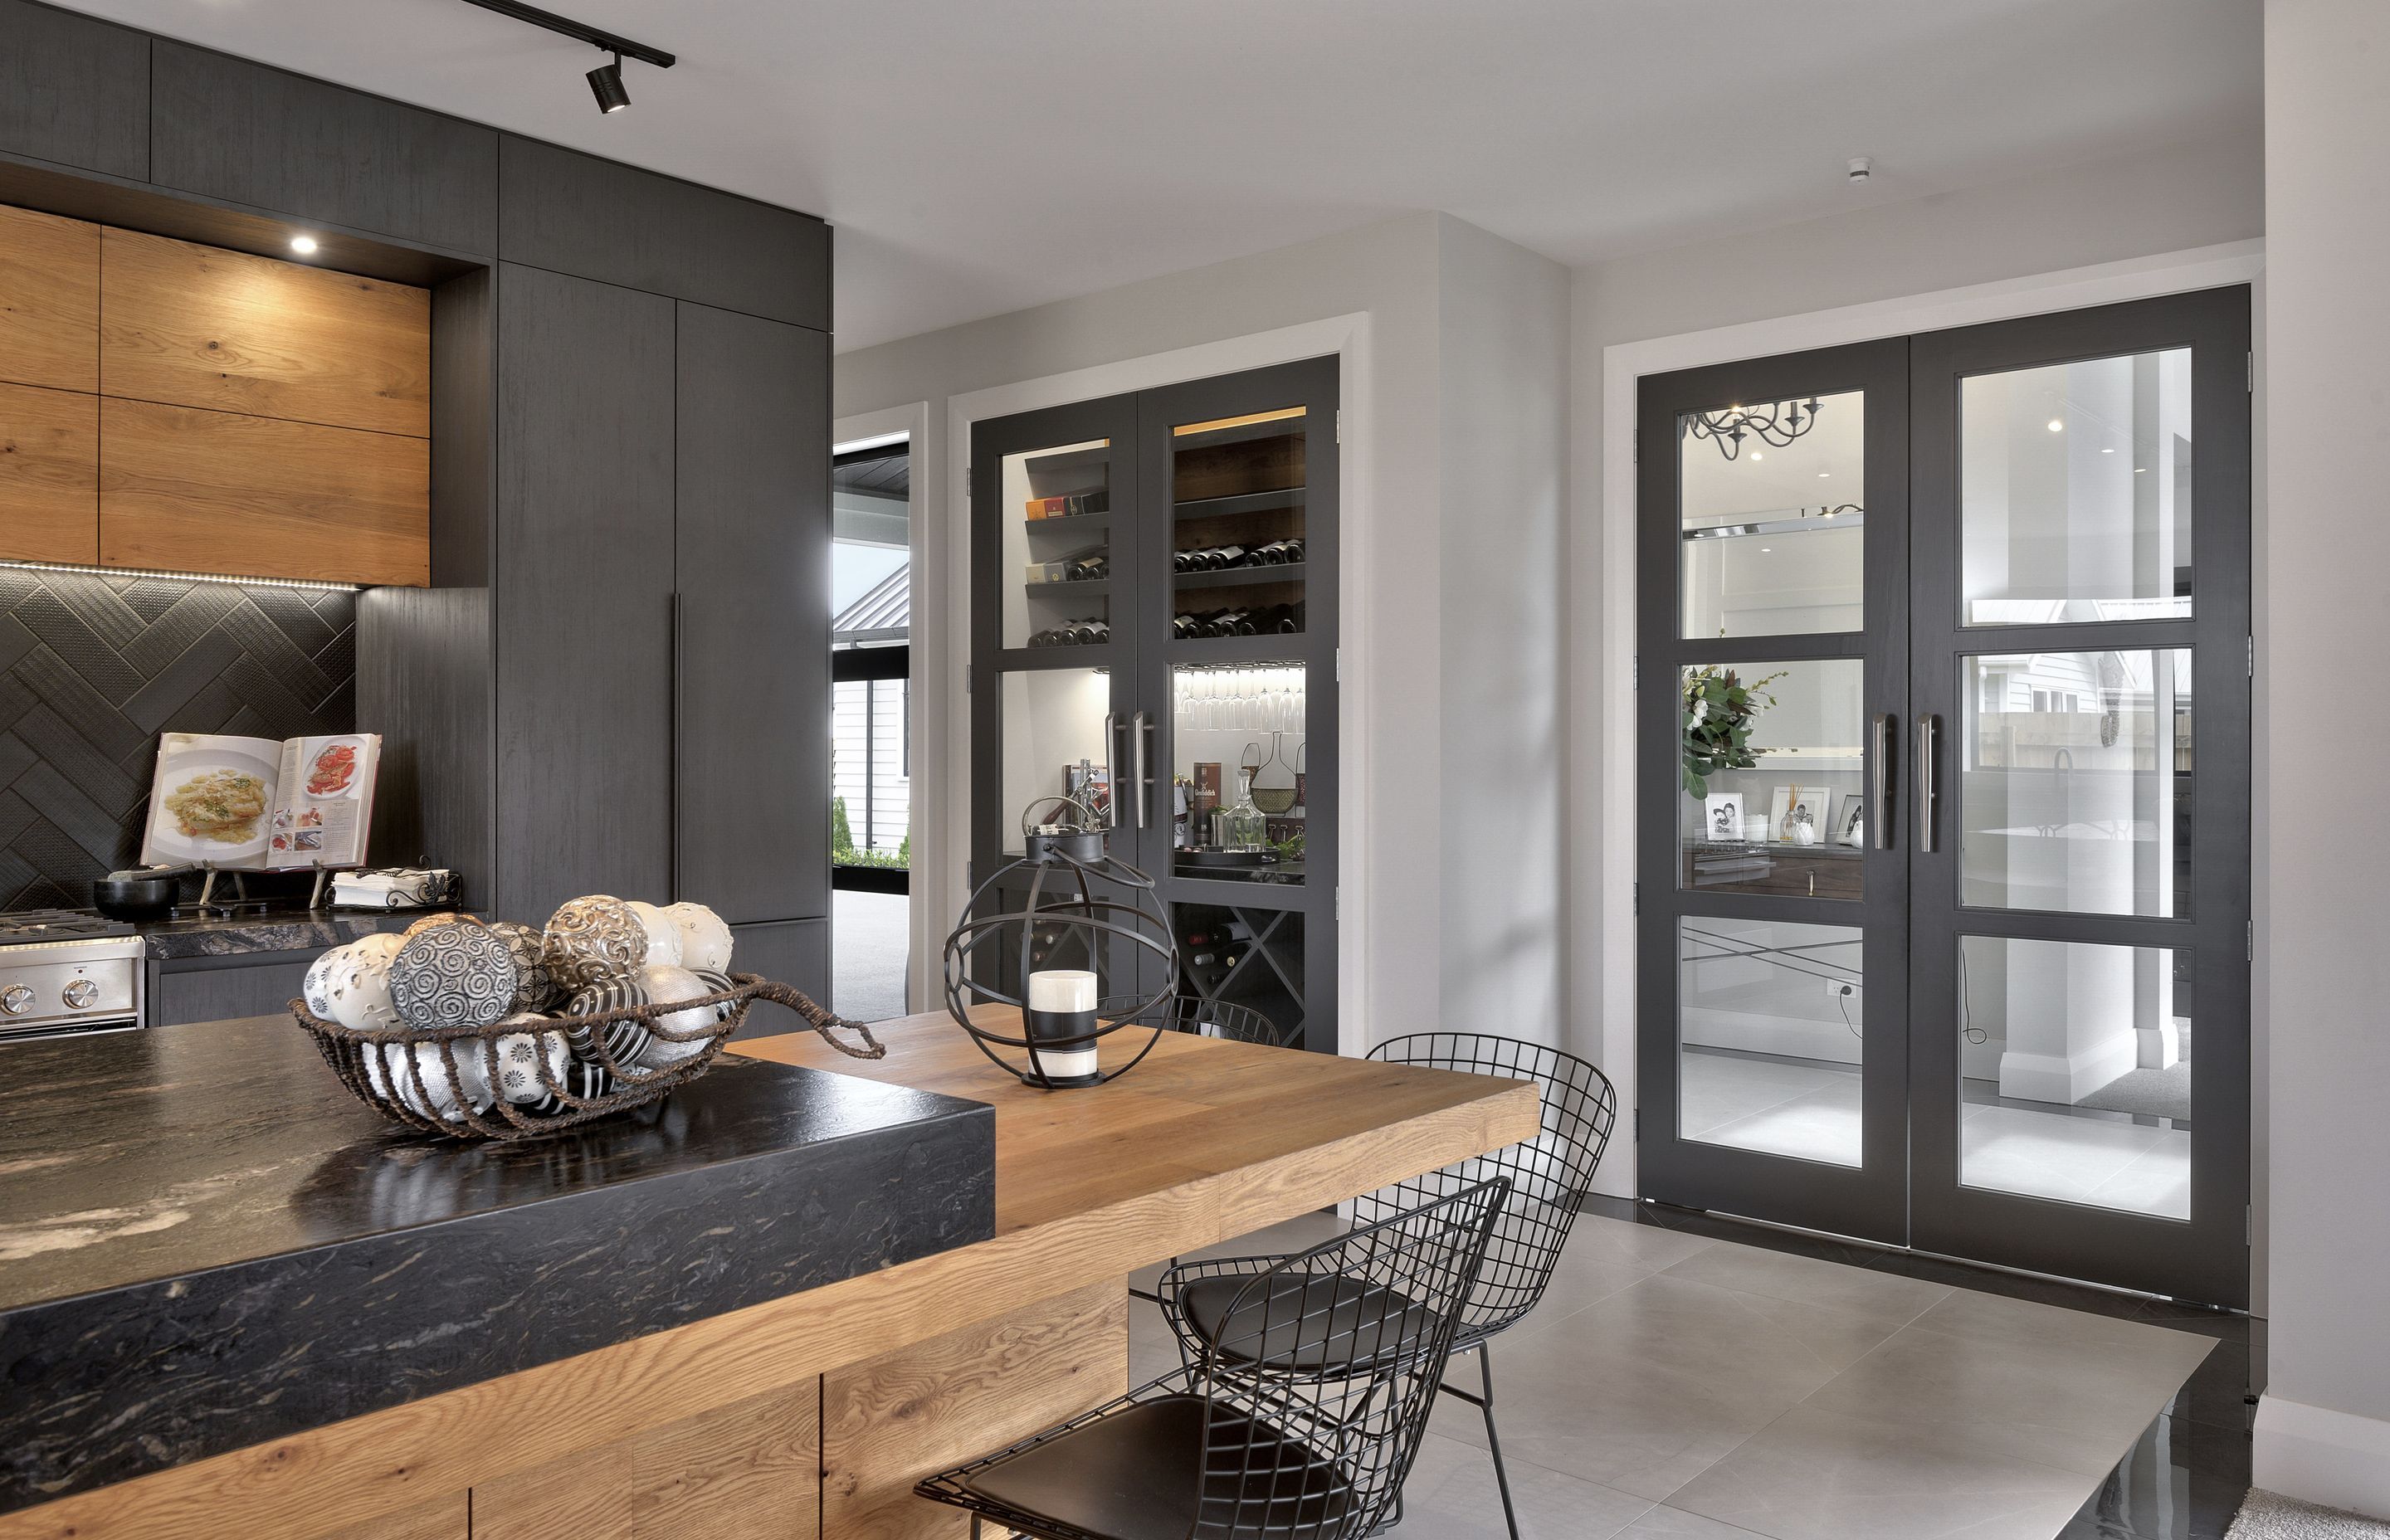 Meticulous finishes and exquisite detailing throughout add further opulence, such as the stunning kitchen, where the dark granite and cabinet doors contrast strikingly with the rich warmth of wood.